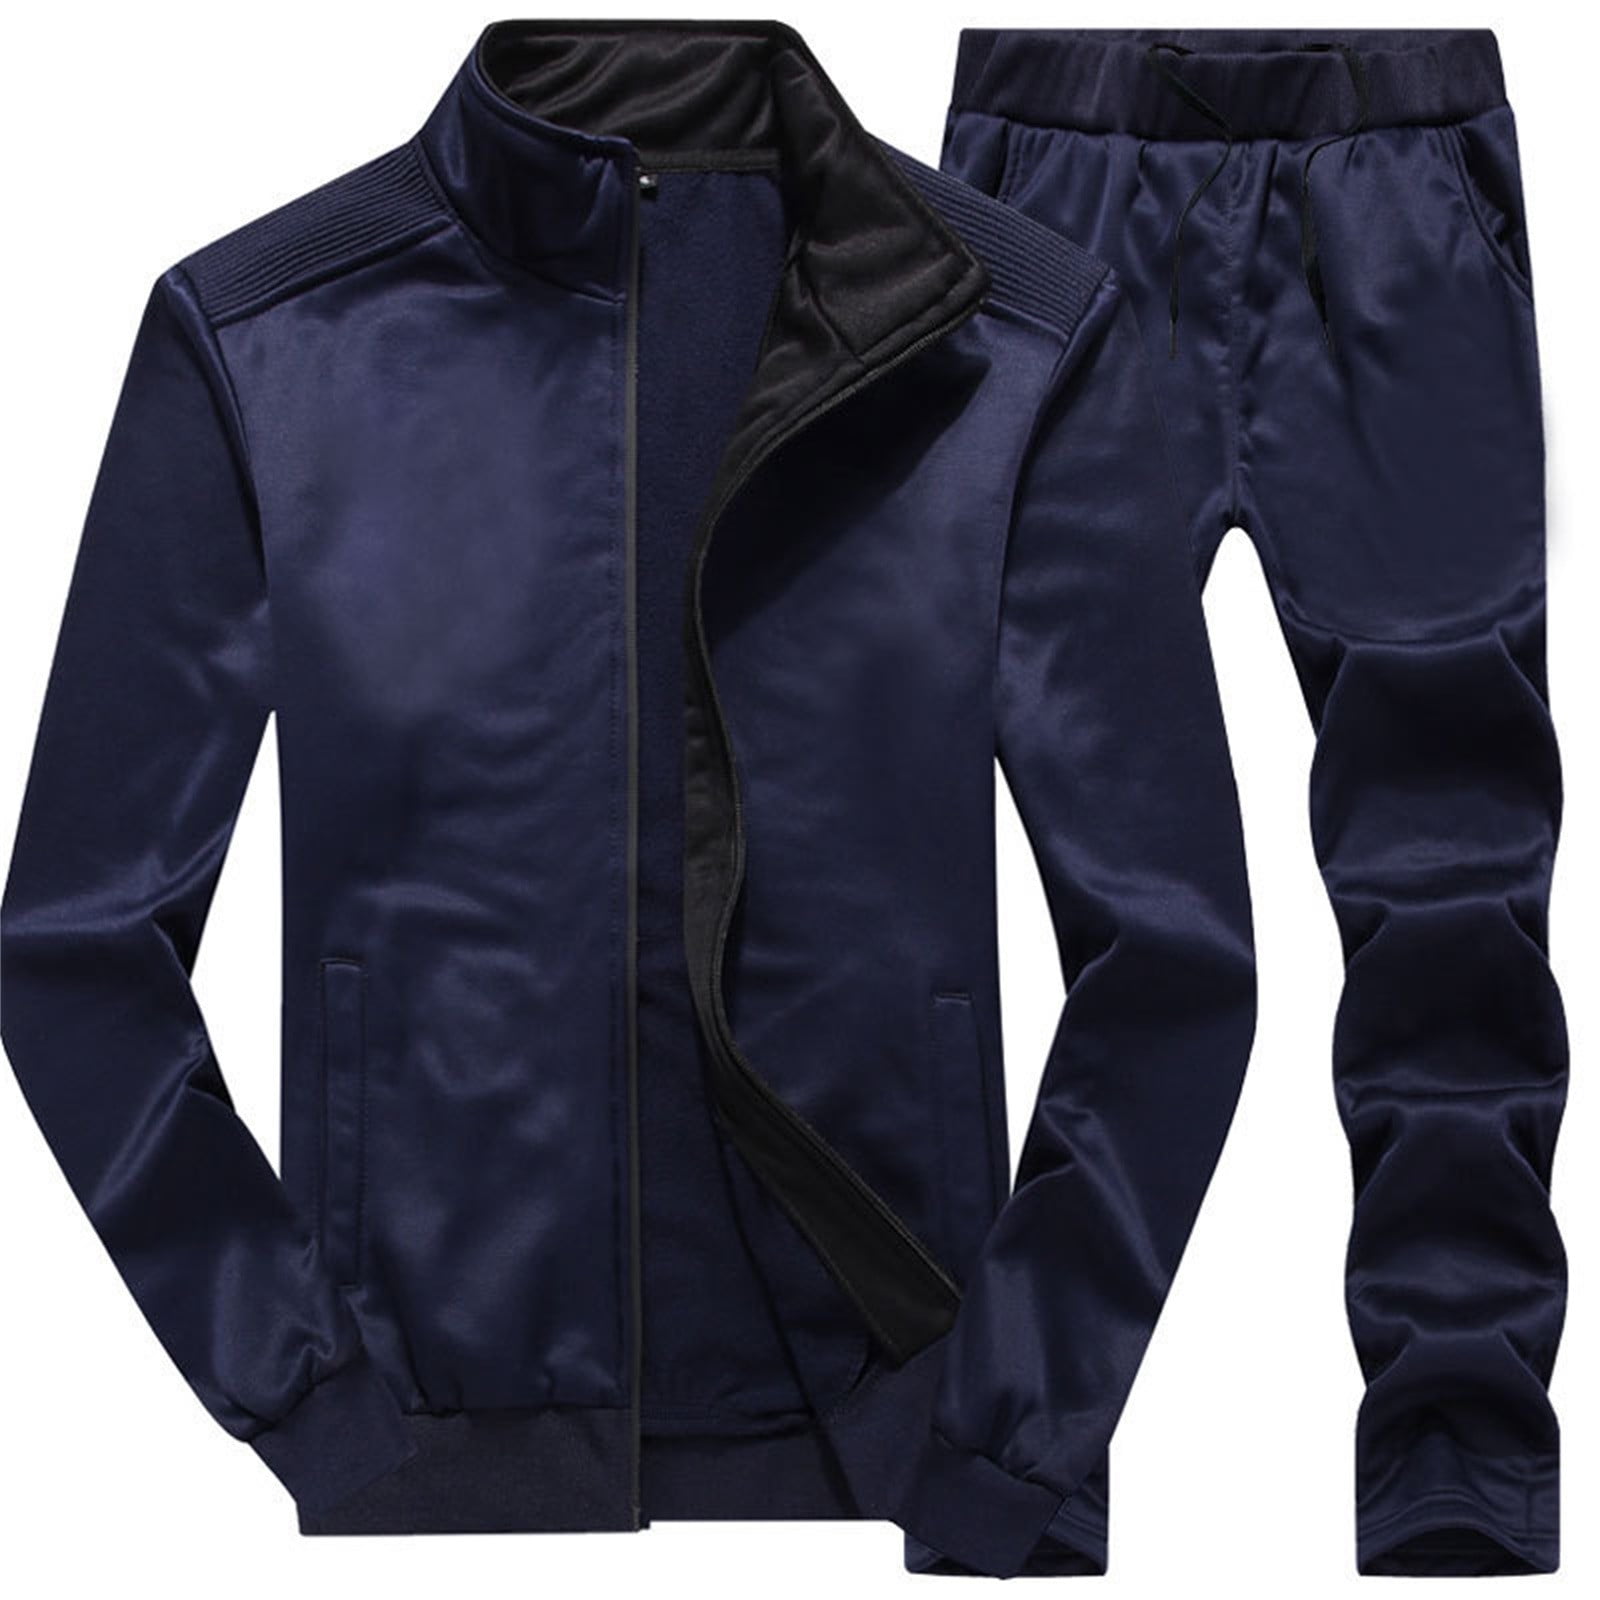 Men's Suits Casual Track Full Zip Running Jogging Sports Jacket and ...